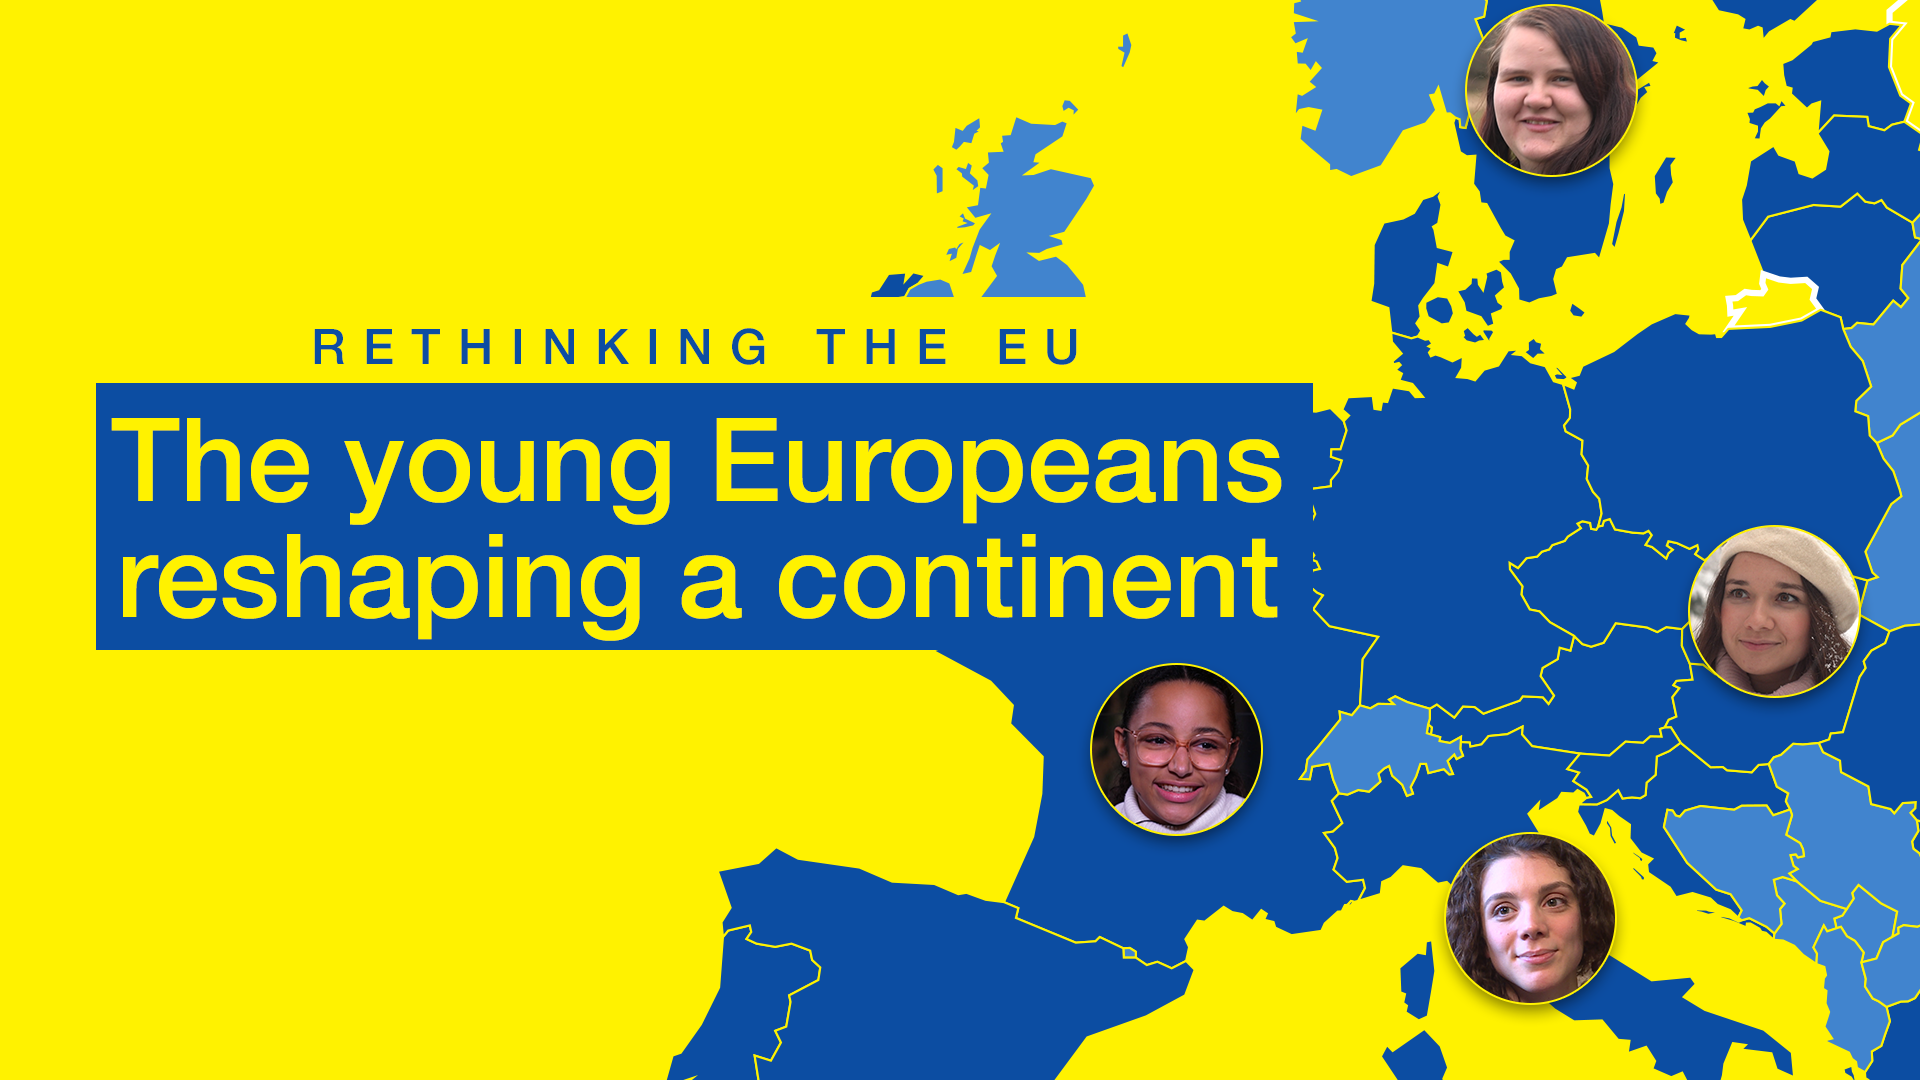 Rethinking the EU: The young Europeans reshaping a continent